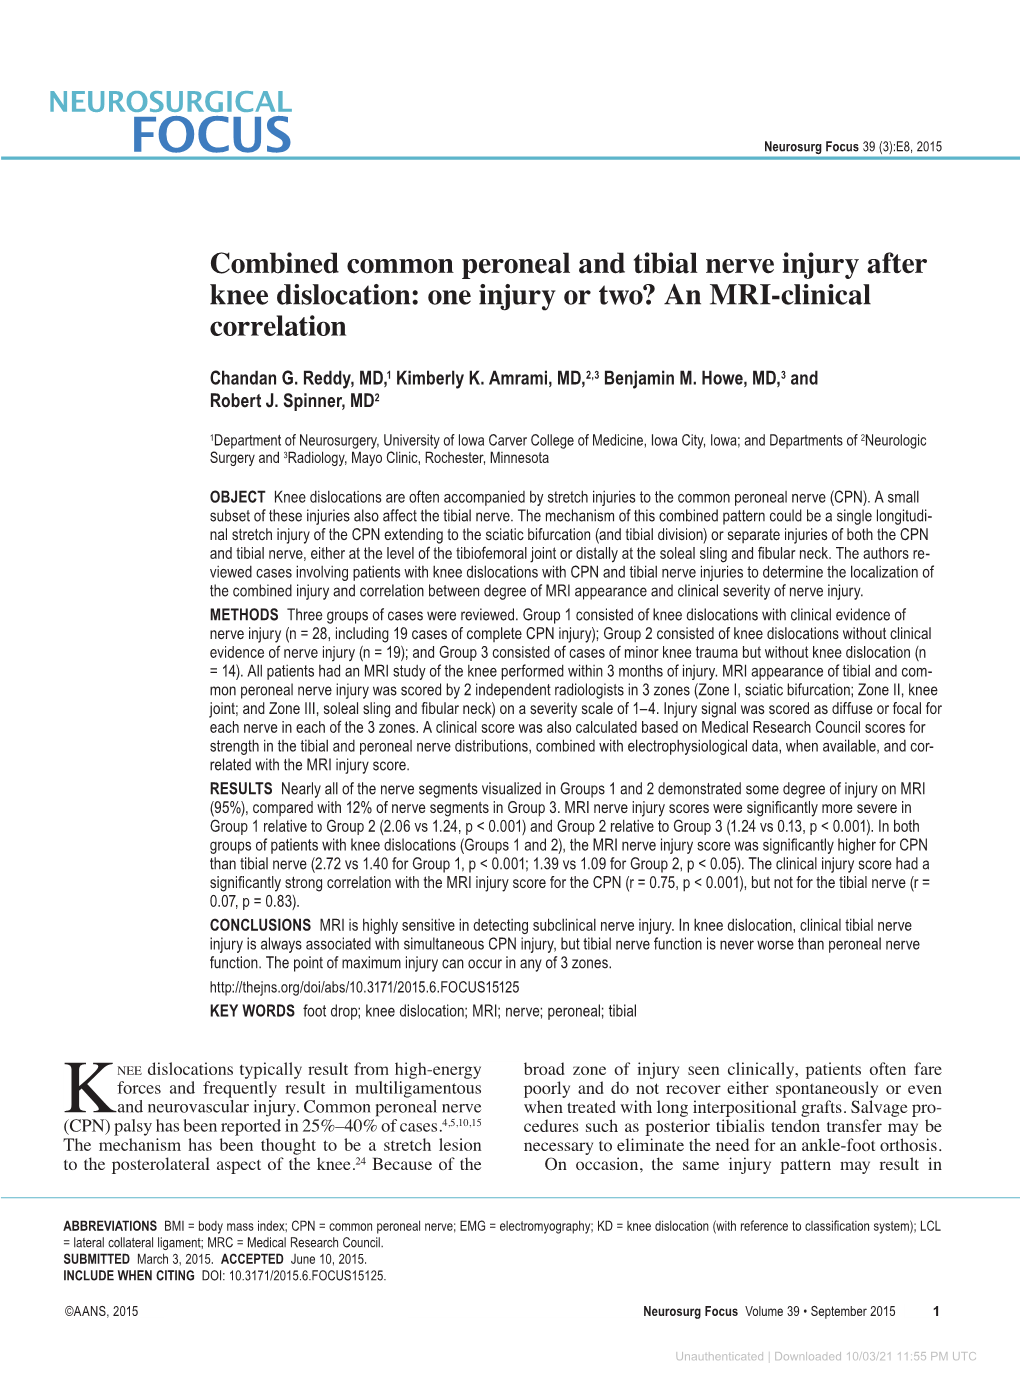 Combined Common Peroneal and Tibial Nerve Injury After Knee Dislocation: One Injury Or Two? an MRI-Clinical Correlation